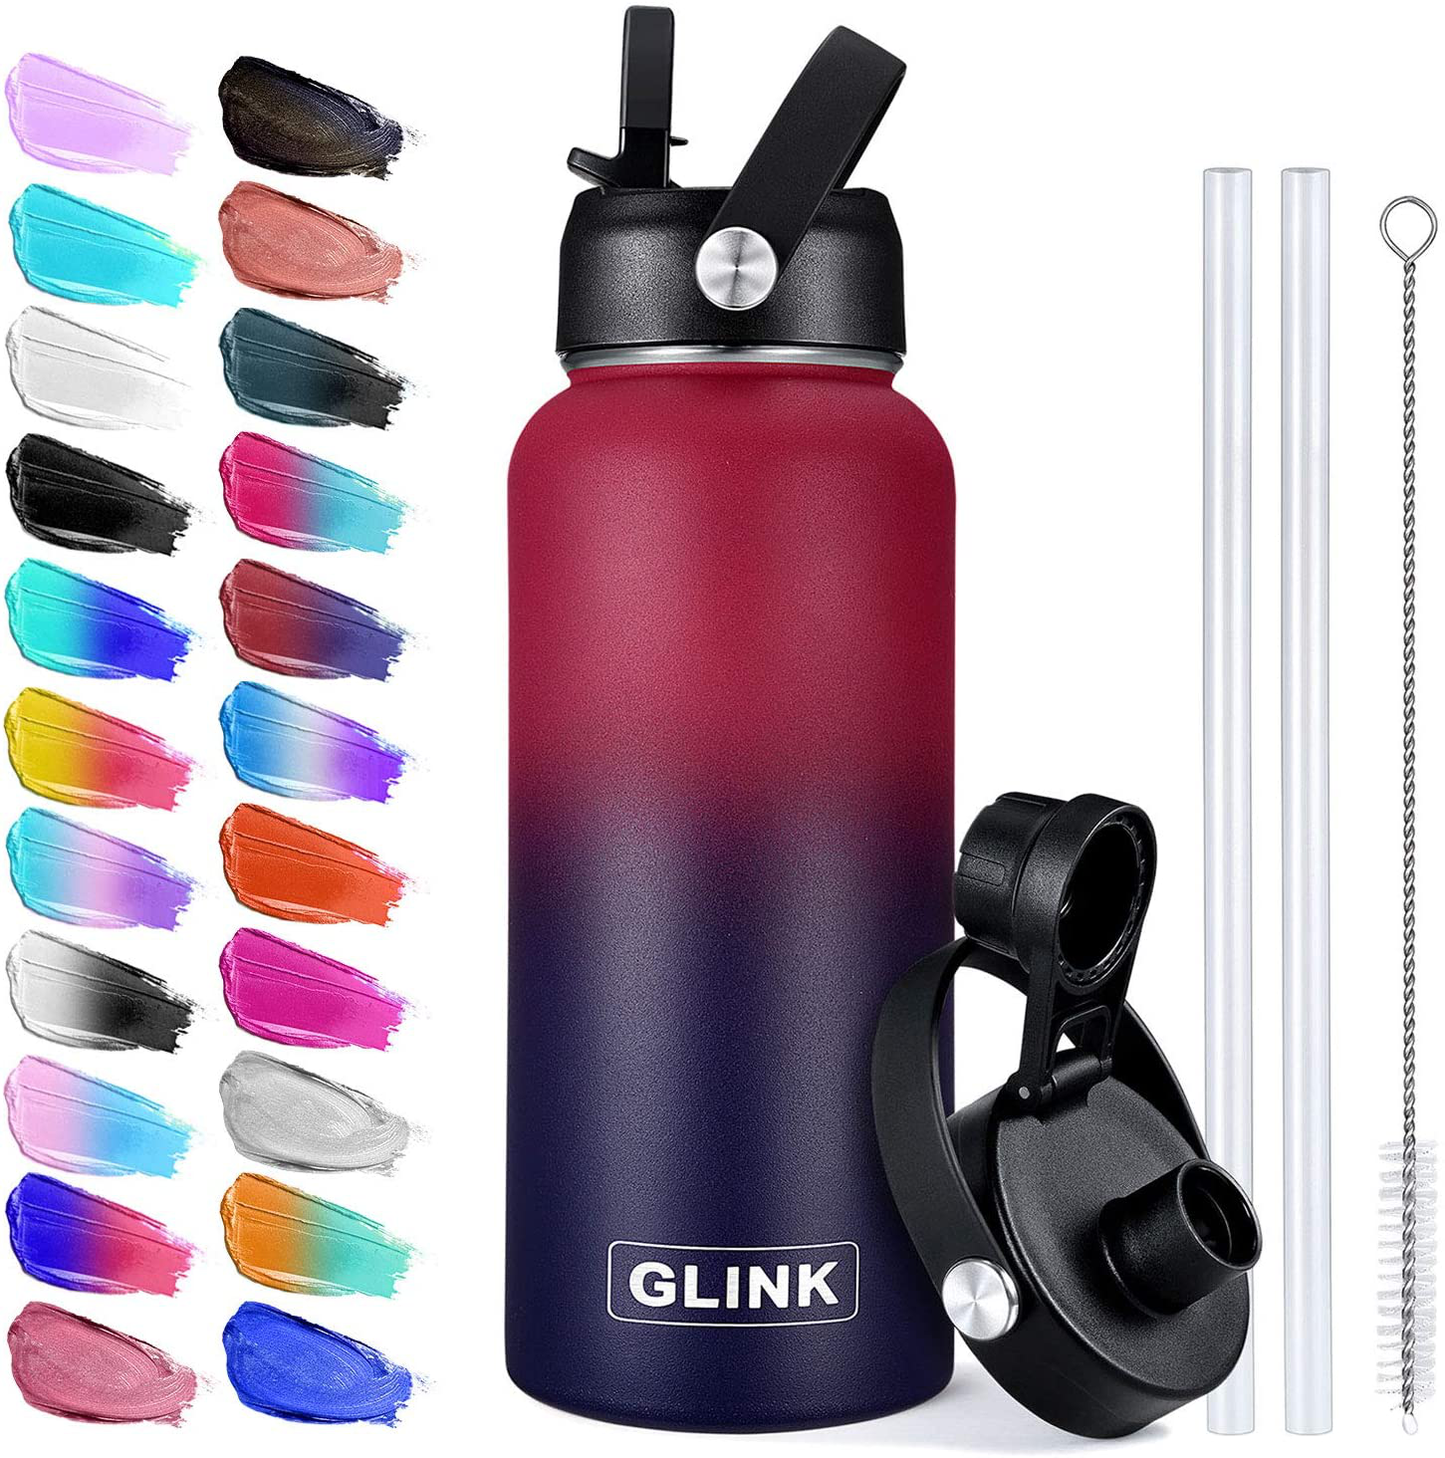 Glink Stainless Steel Water Bottle with Straw, 32-40 oz Wide Mouth Double Wall Vacuum Insulated Water Bottle Leakproof, Straw Lid and Spout Lid with New Rotating Rubber Handle